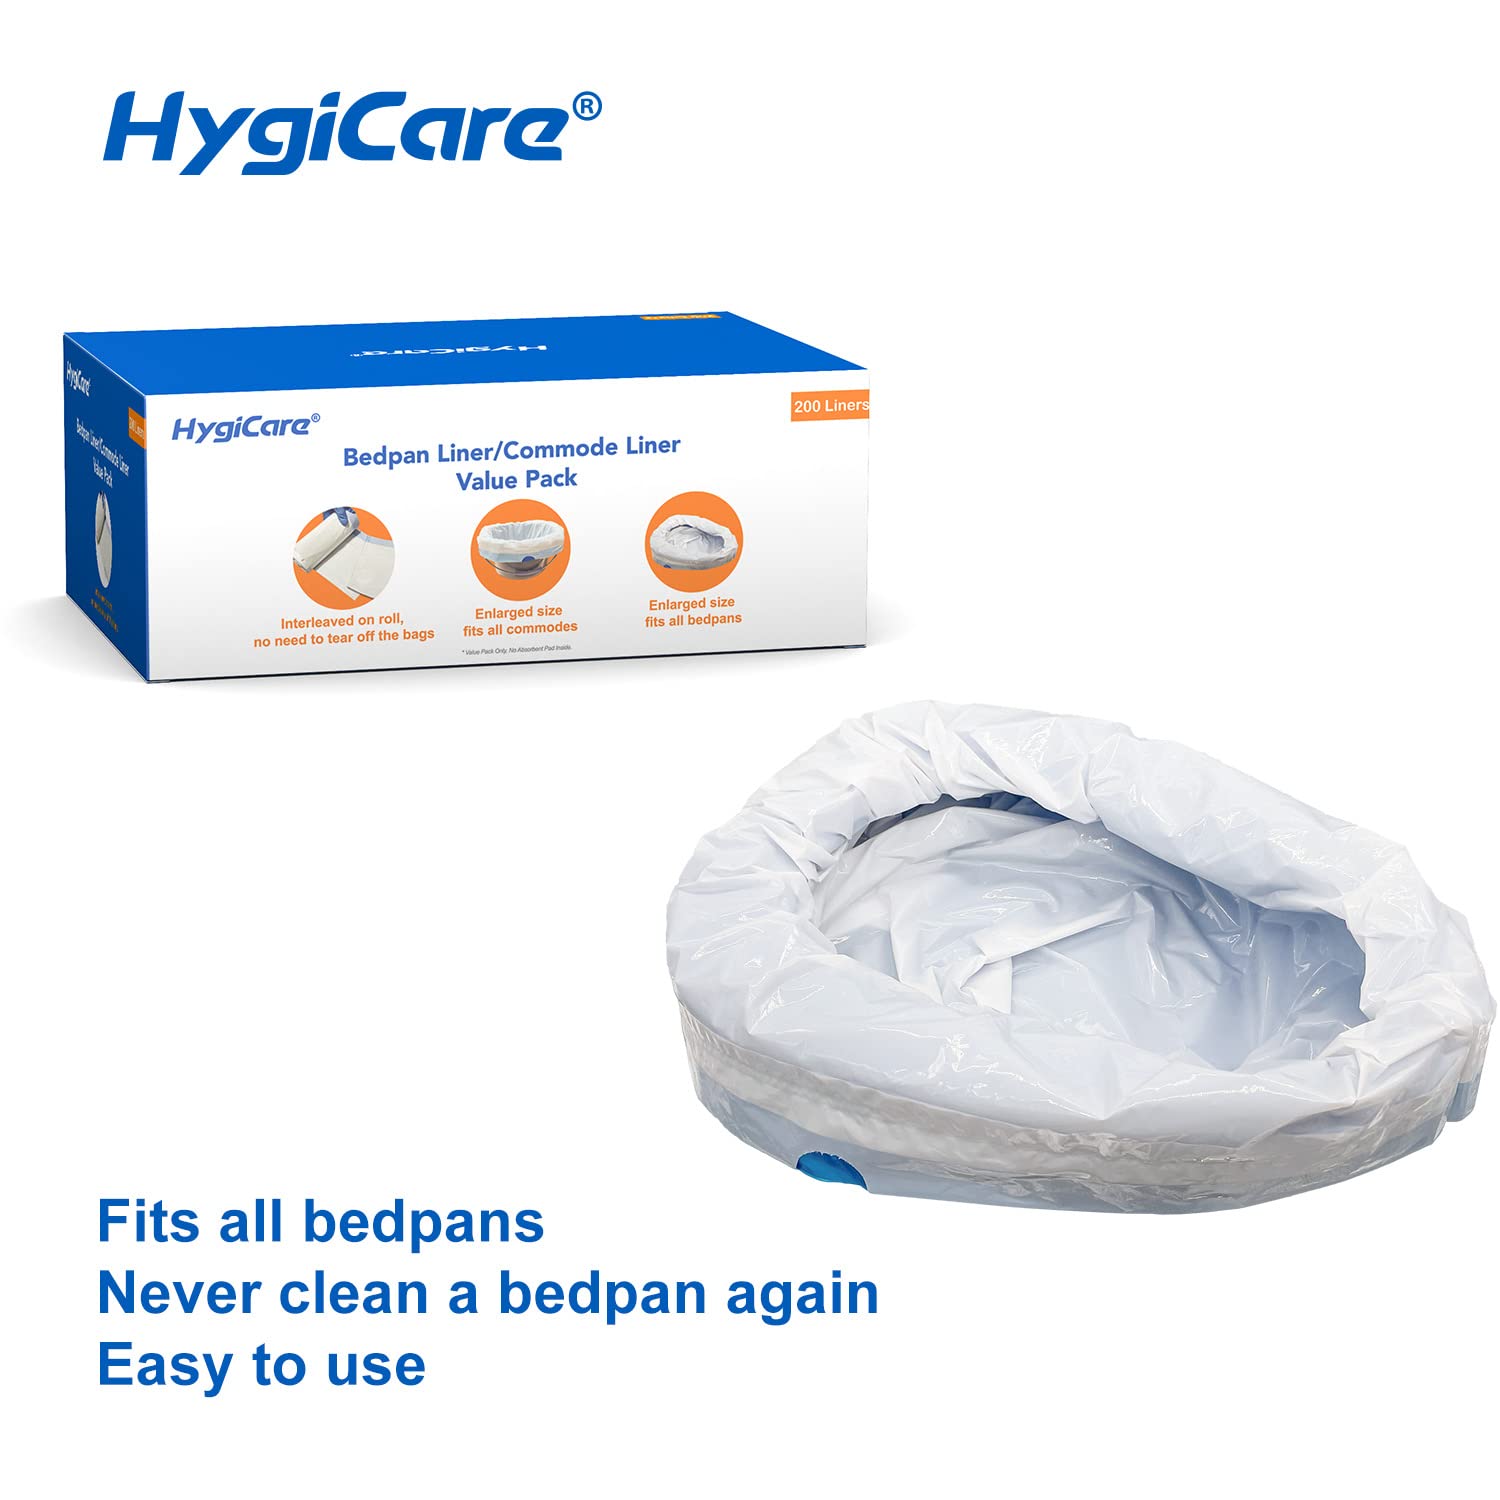 HygiCare Enlarged Bedpan and Commode Liners Value Pack 200 Count, Leakproof, Medical Grade, Portable Toilet Bag Fits All Bedpans and Commode Buckets, Interleaved Bags on Roll No Need to Tear off Bags